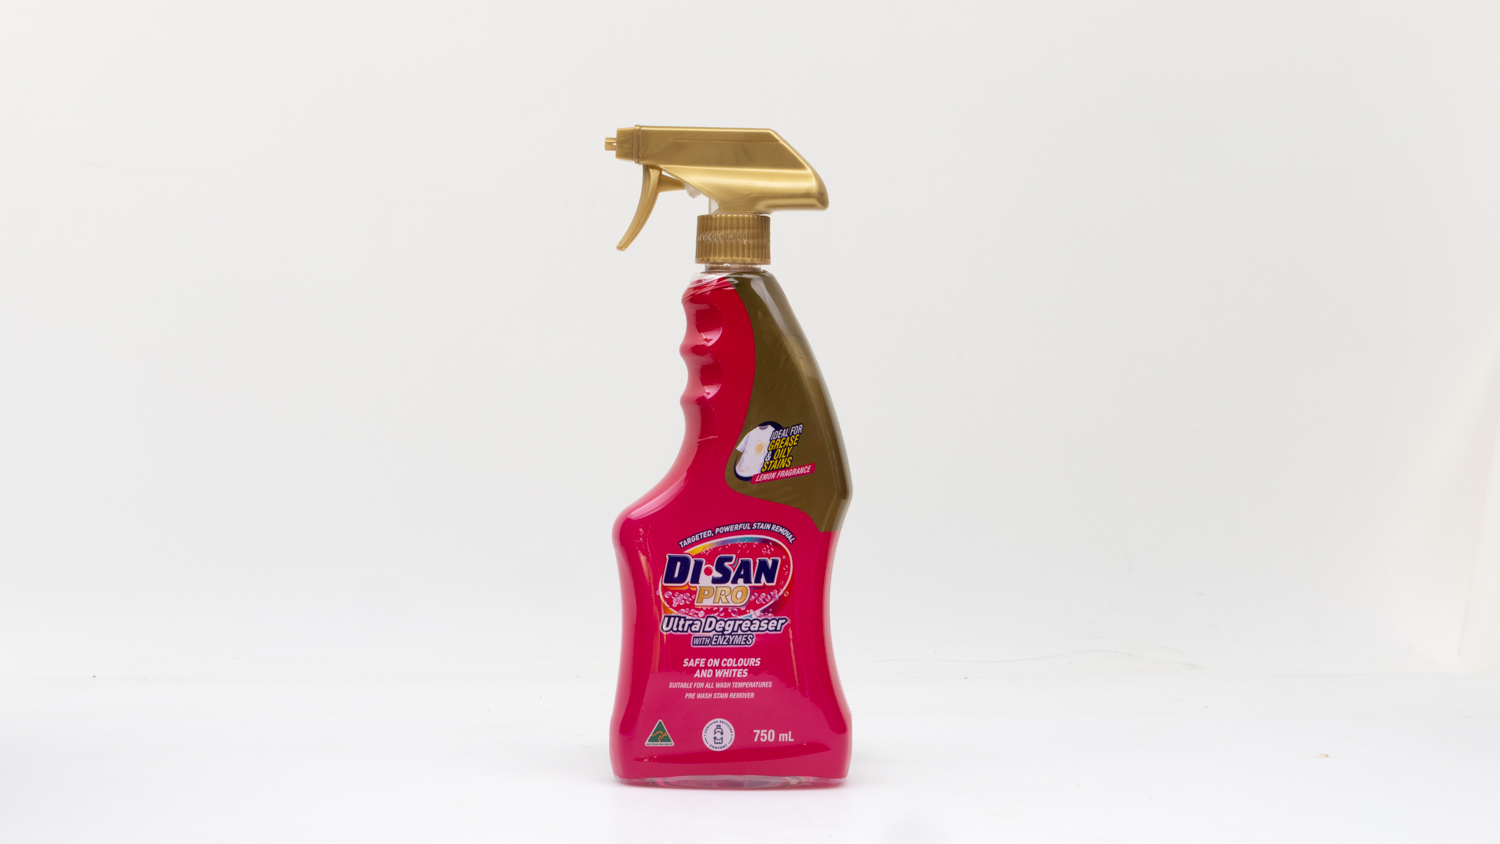 Aldi Di-San Pro Ultra Degreaser with Enzymes carousel image